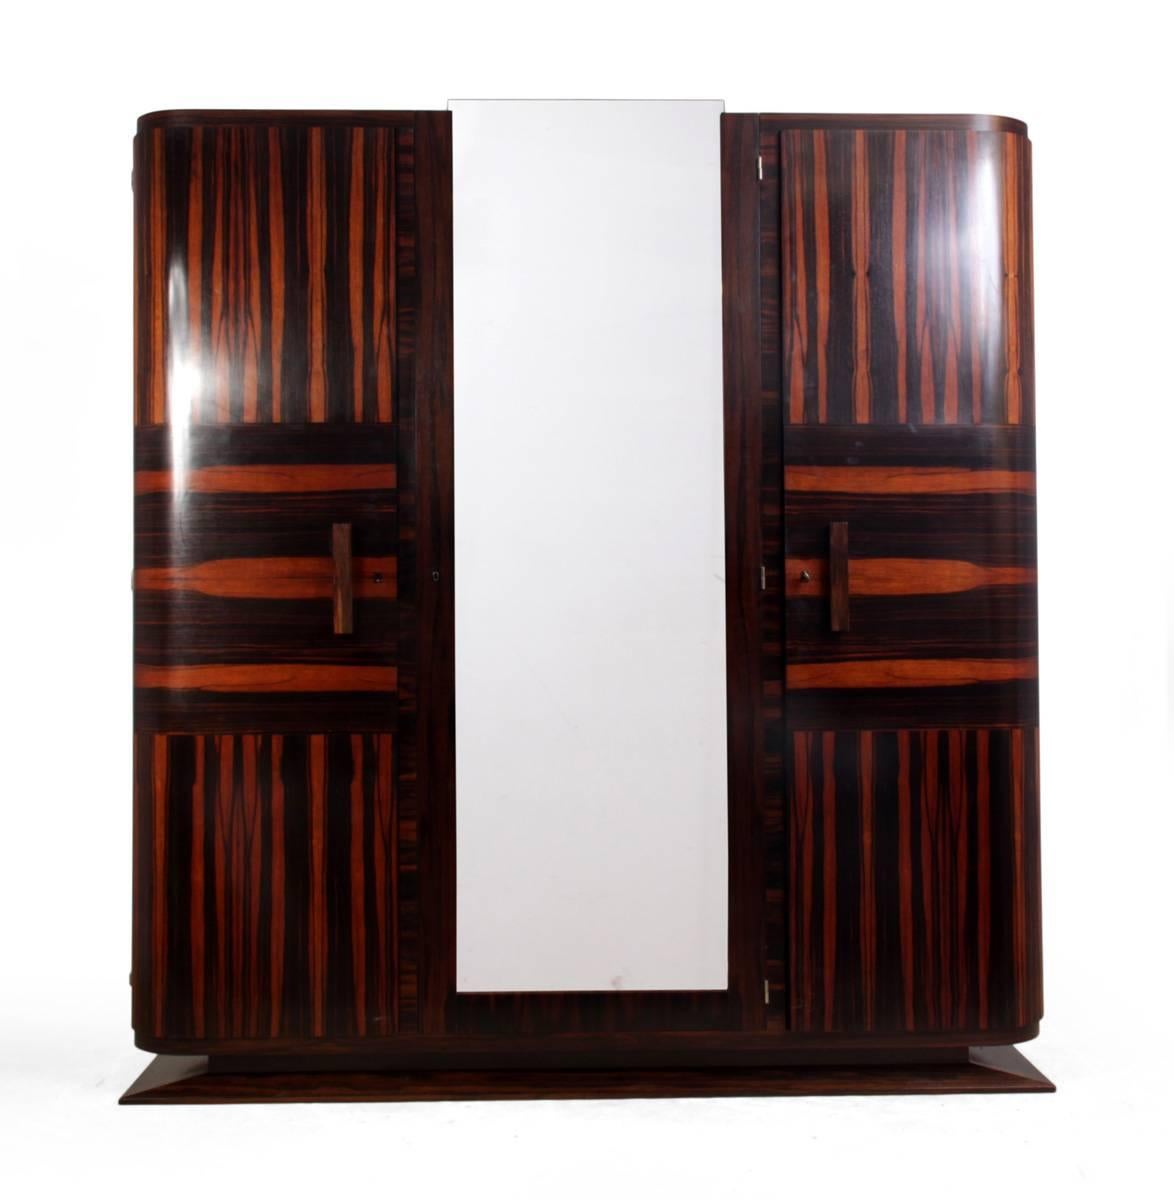 Art Deco armoire in Macassar ebony
A very rare Macassar ebony armoire, with three doors the centre door being mirrored, the two outer doors have rounded corners the original key supplied fits all three doors, the shelves behind are fully adjustable